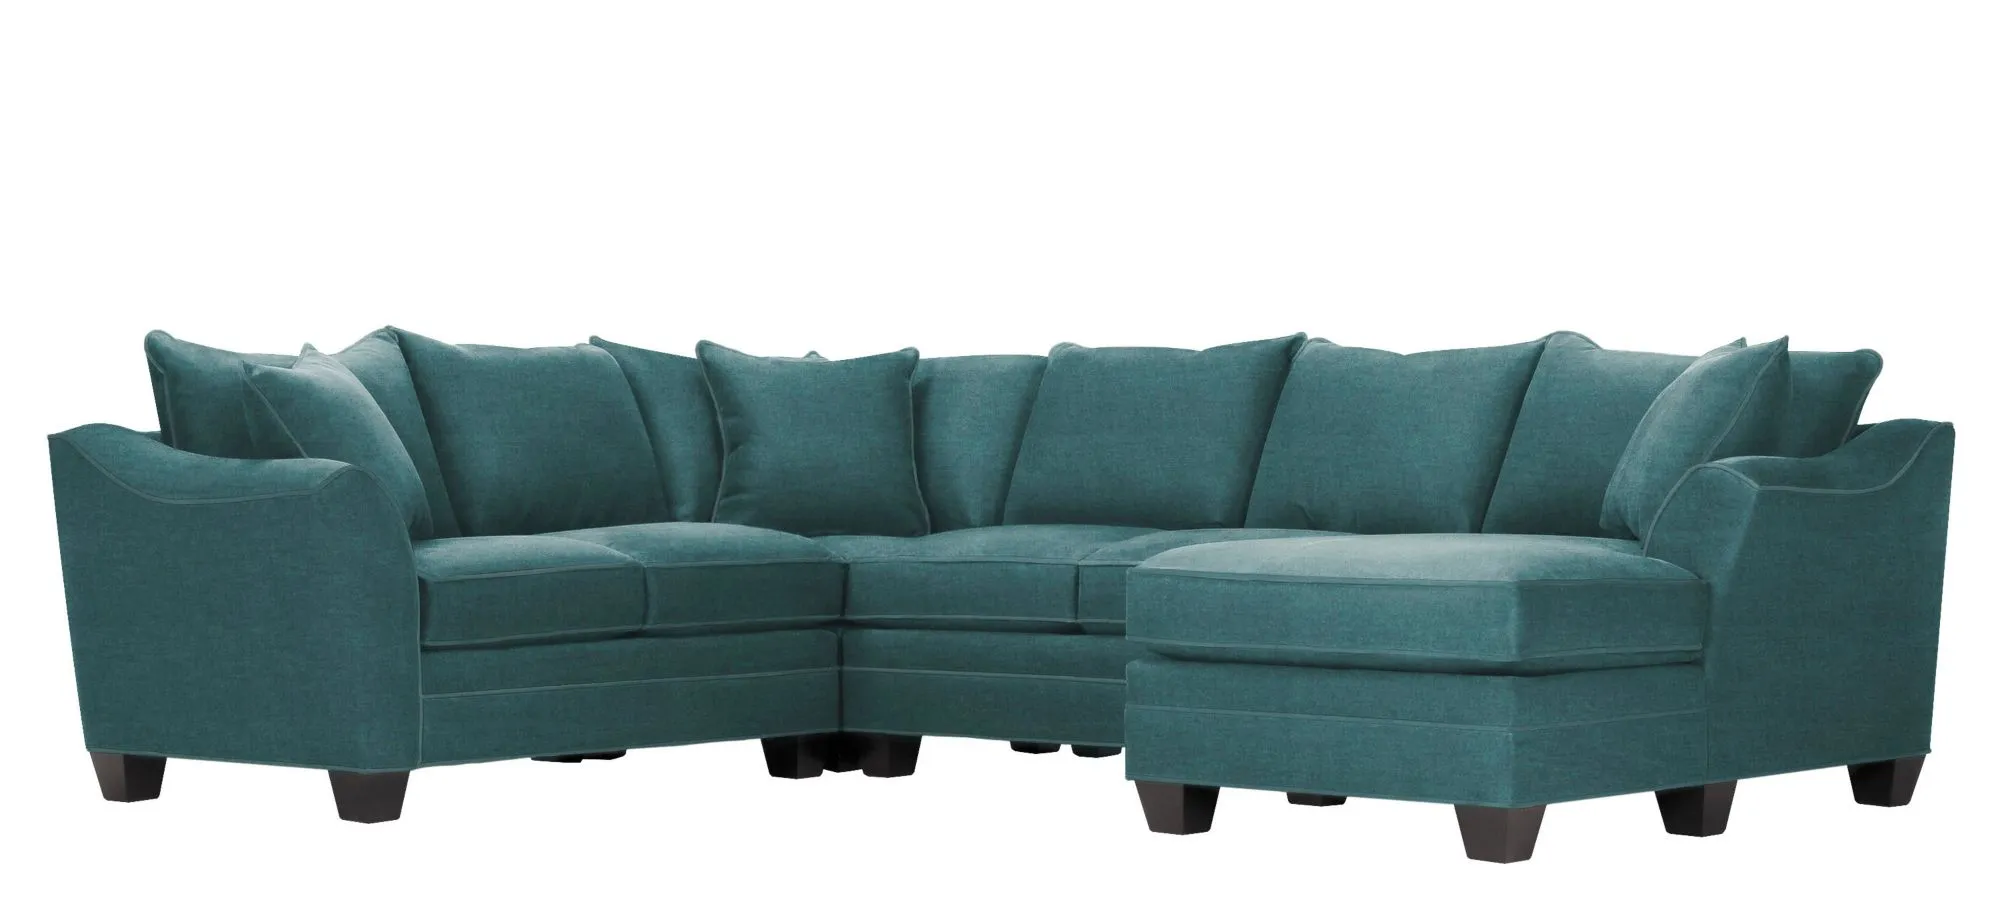 Foresthill 4-pc. Sectional w/ Right Arm Facing Chaise in Santa Rosa Turquoise by H.M. Richards